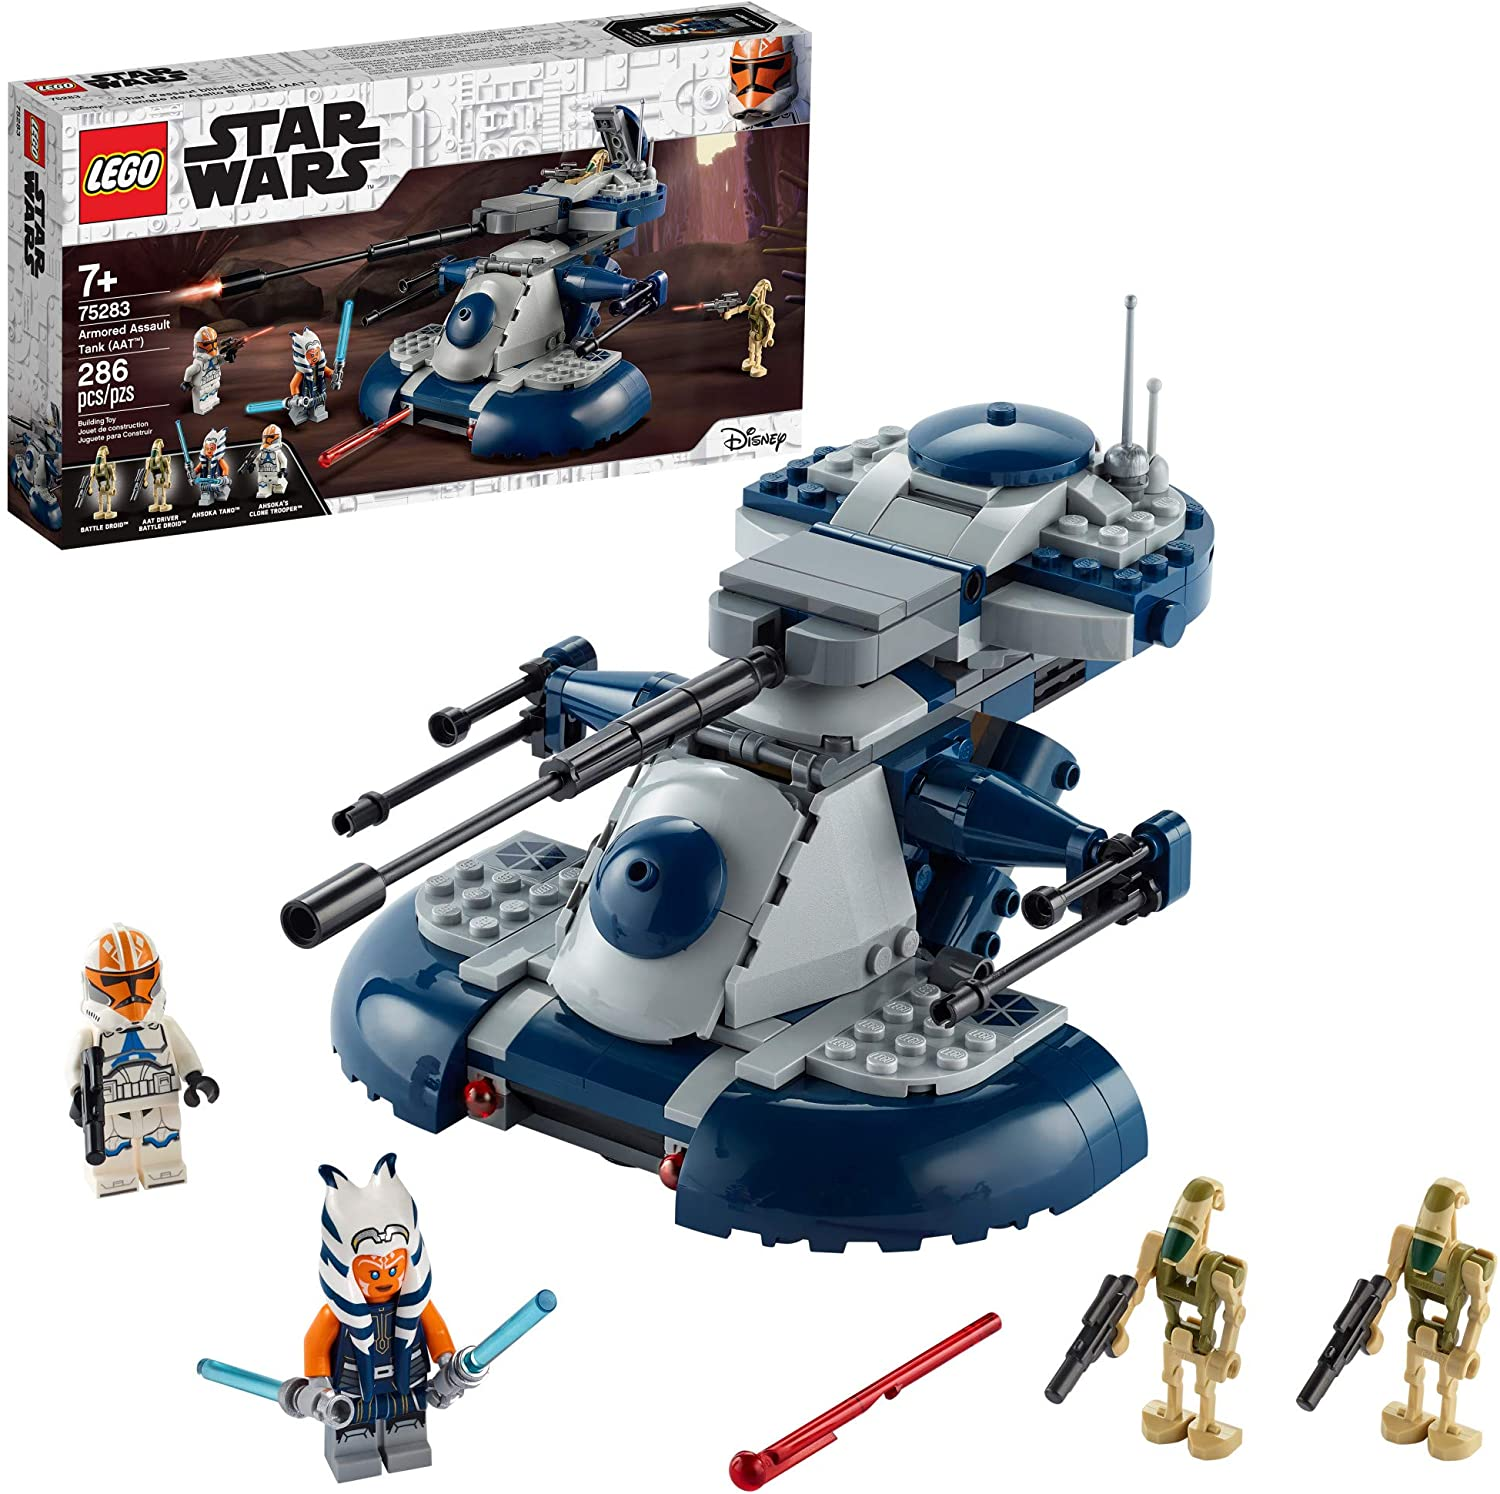 Amazon.com: LEGO Star Wars: The Clone Wars Armored Assault Tank (AAT) 75283 Building Kit, Awesome Construction Toy for Kids with Ahsoka Tano Plus Battle Droids $32.00